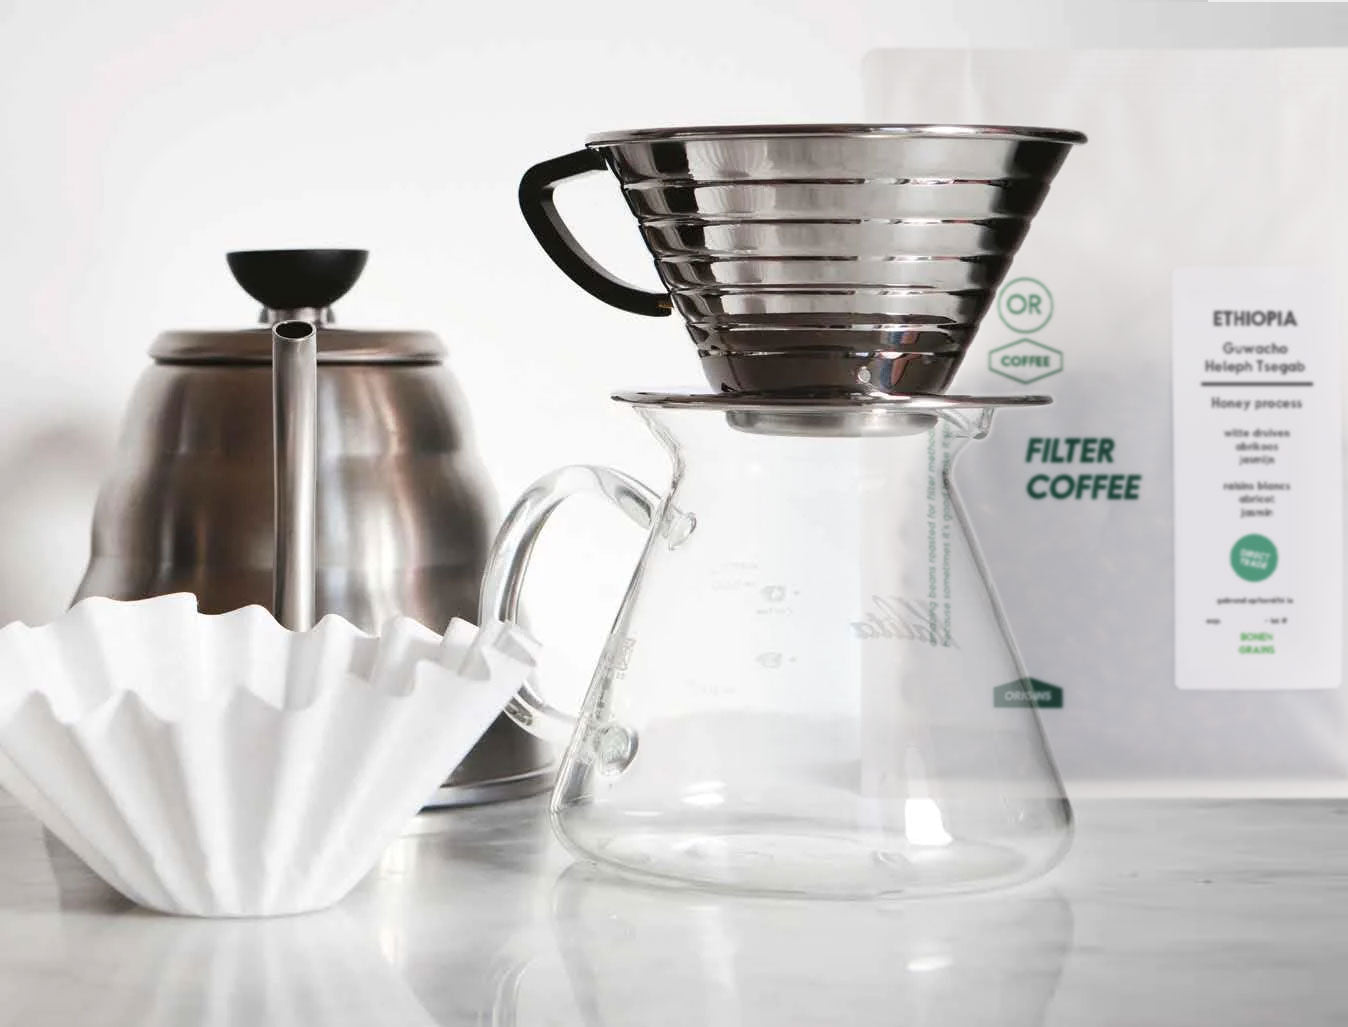 How to make filter coffee with the Kalita